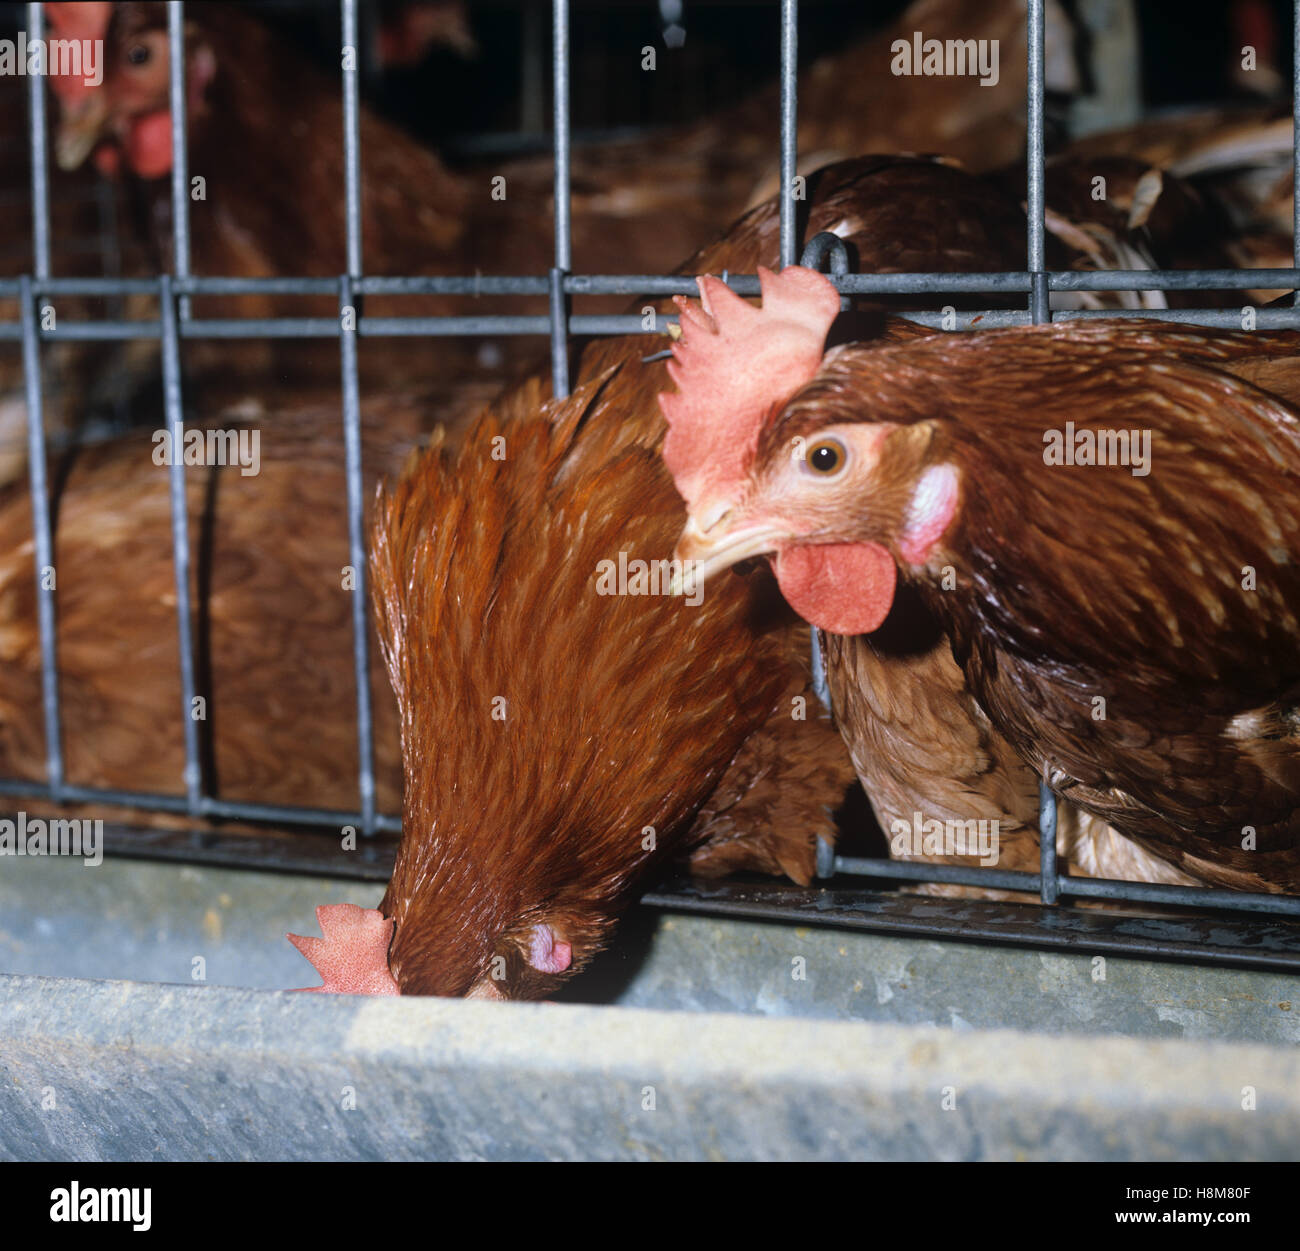 Caged brown warren battery egg laying hens and feeding trough Stock Photo